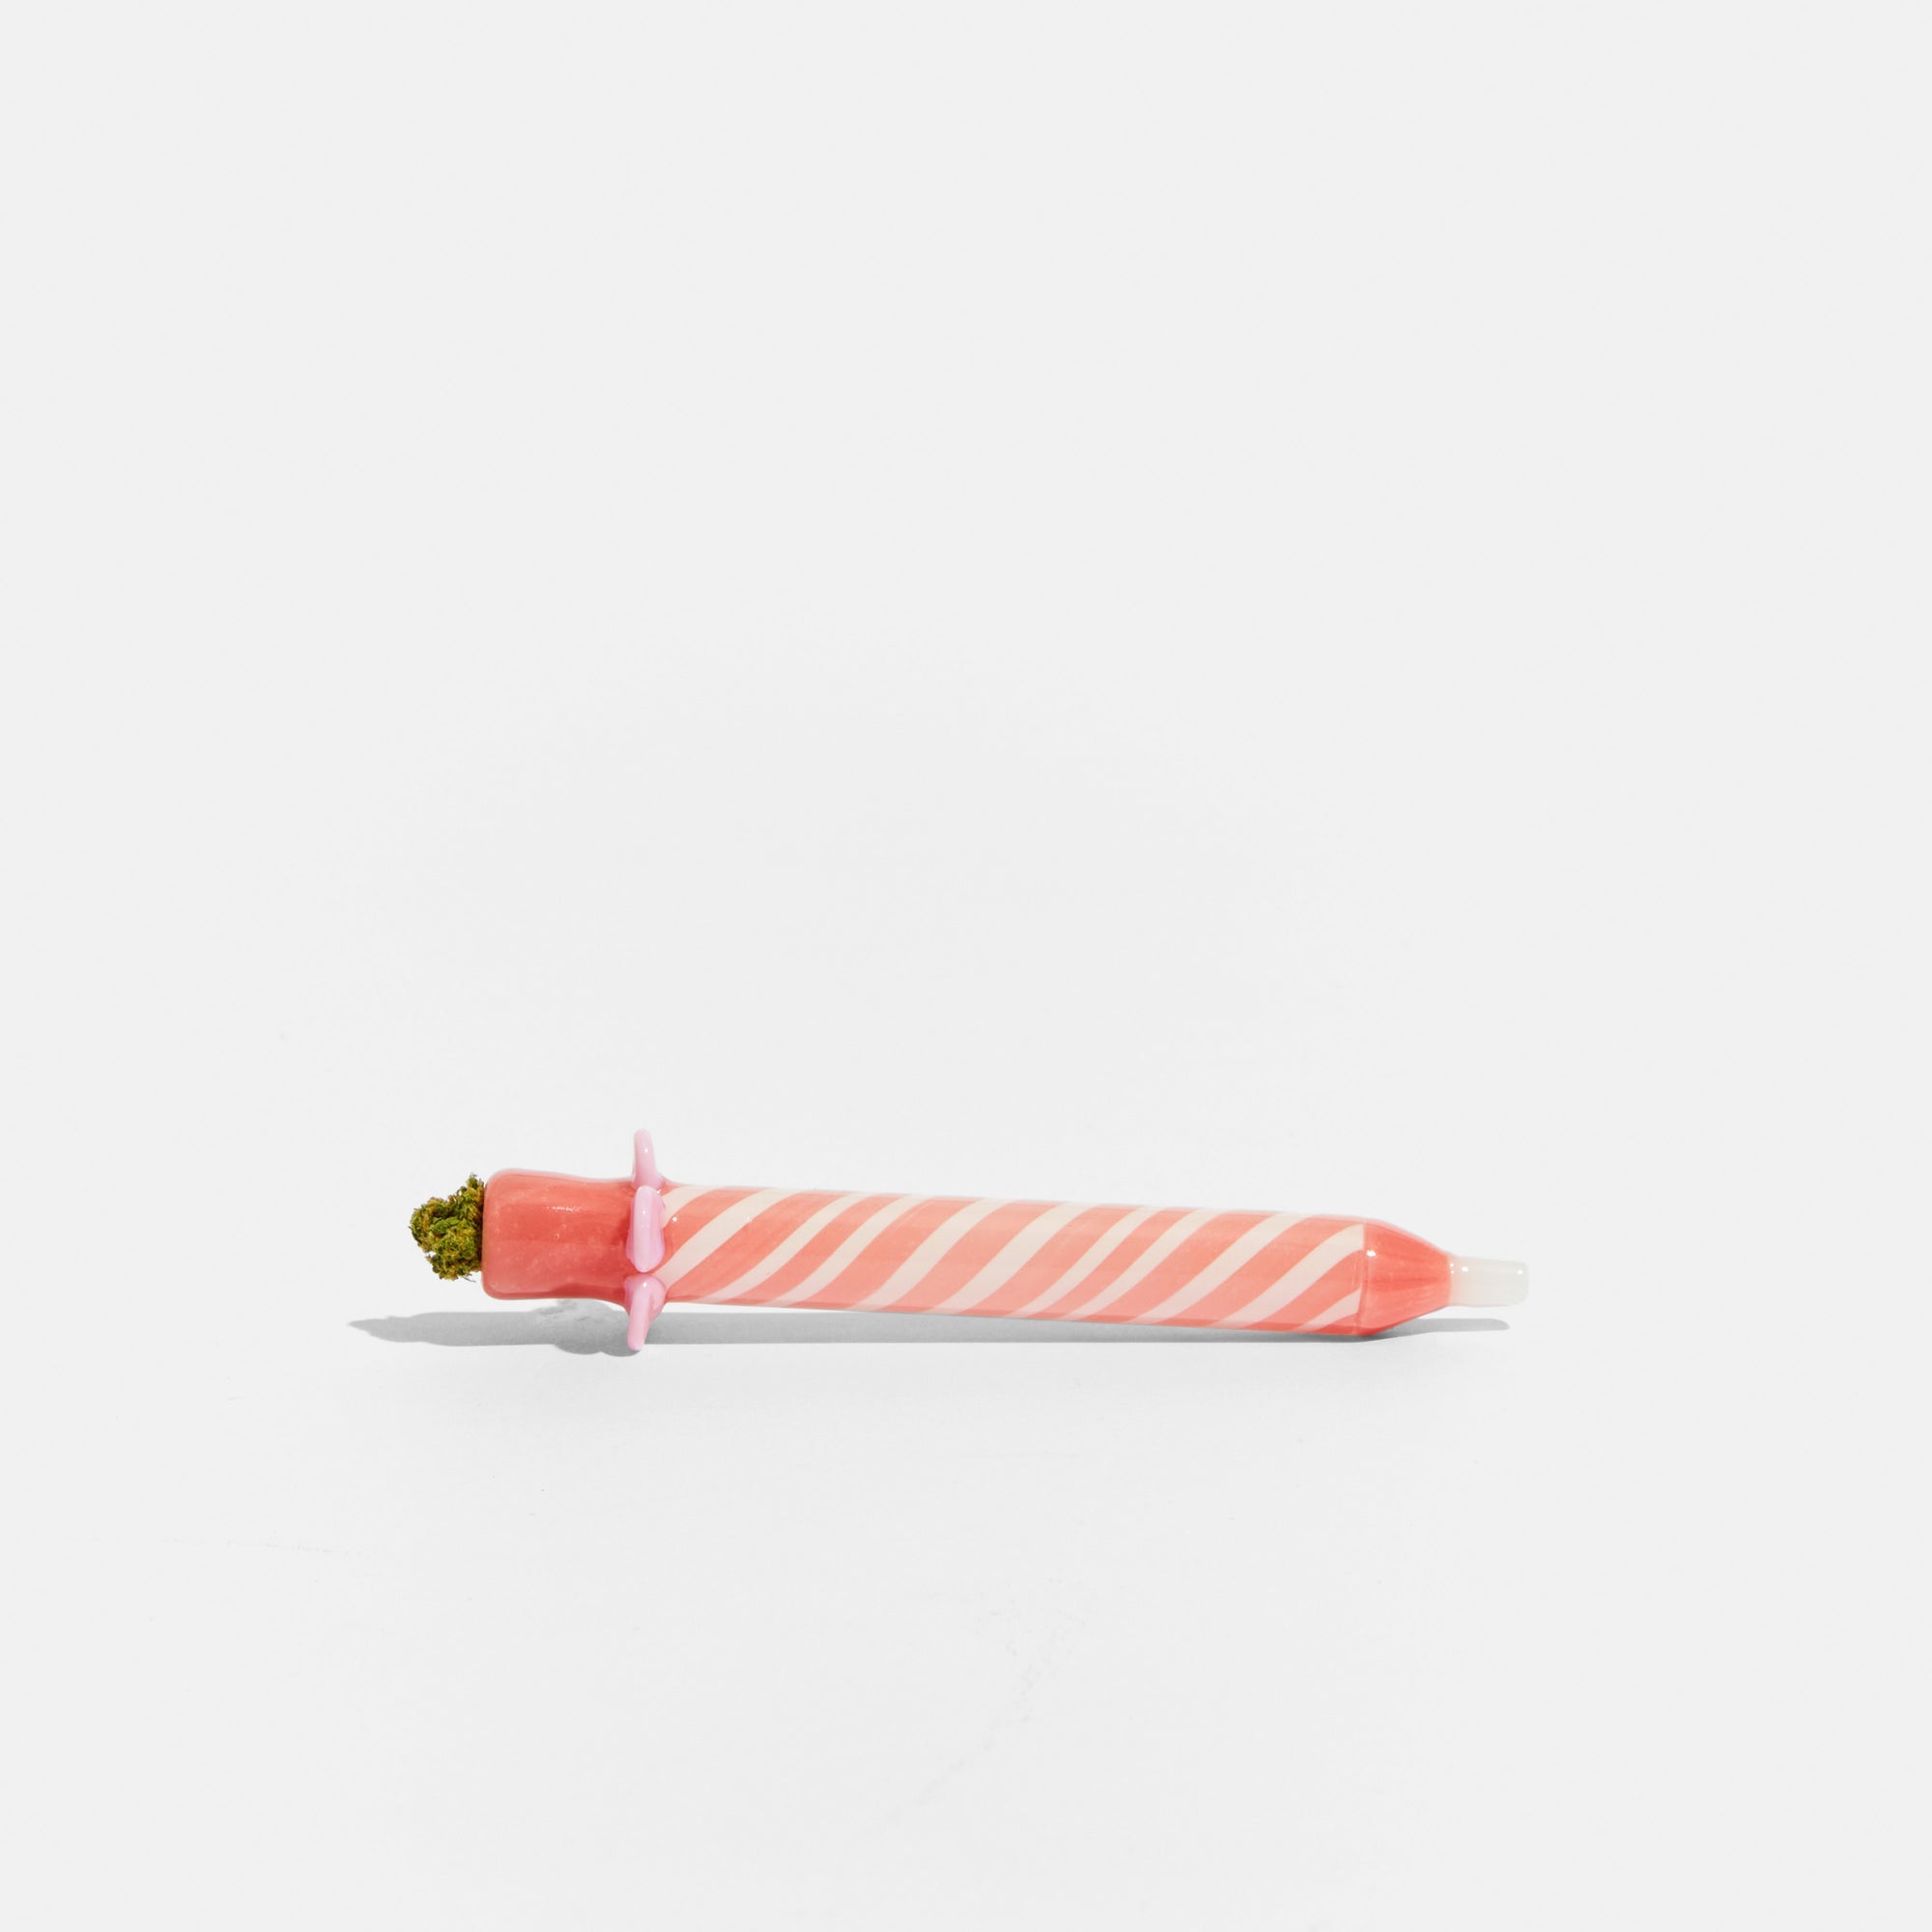 Candle One-Hitter, Carnation Pink